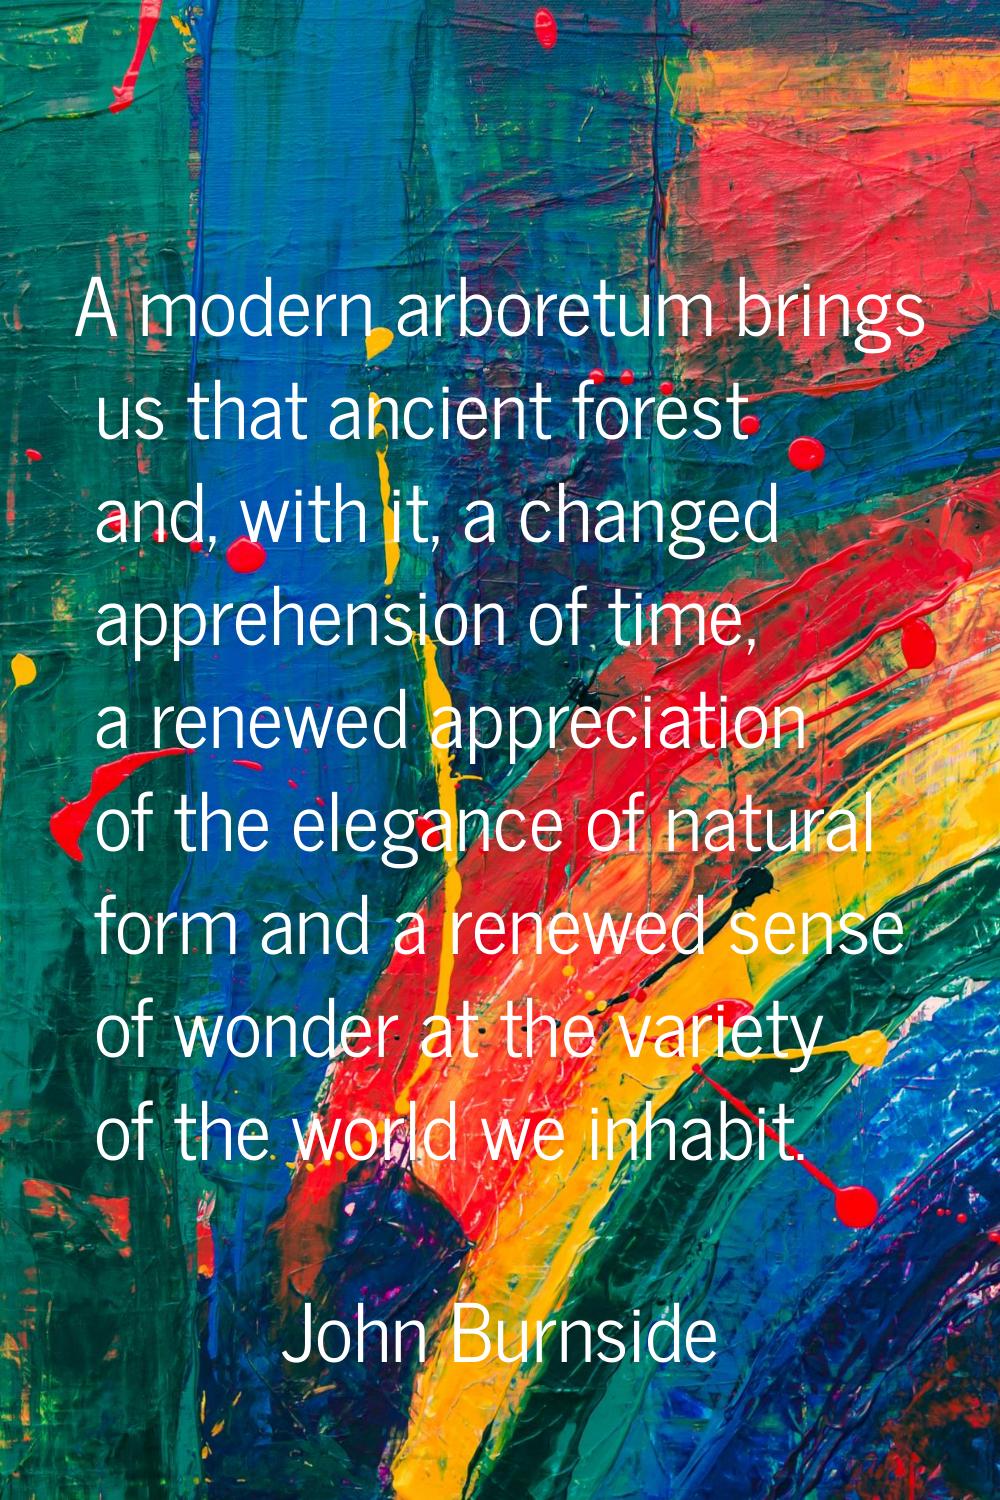 A modern arboretum brings us that ancient forest and, with it, a changed apprehension of time, a re